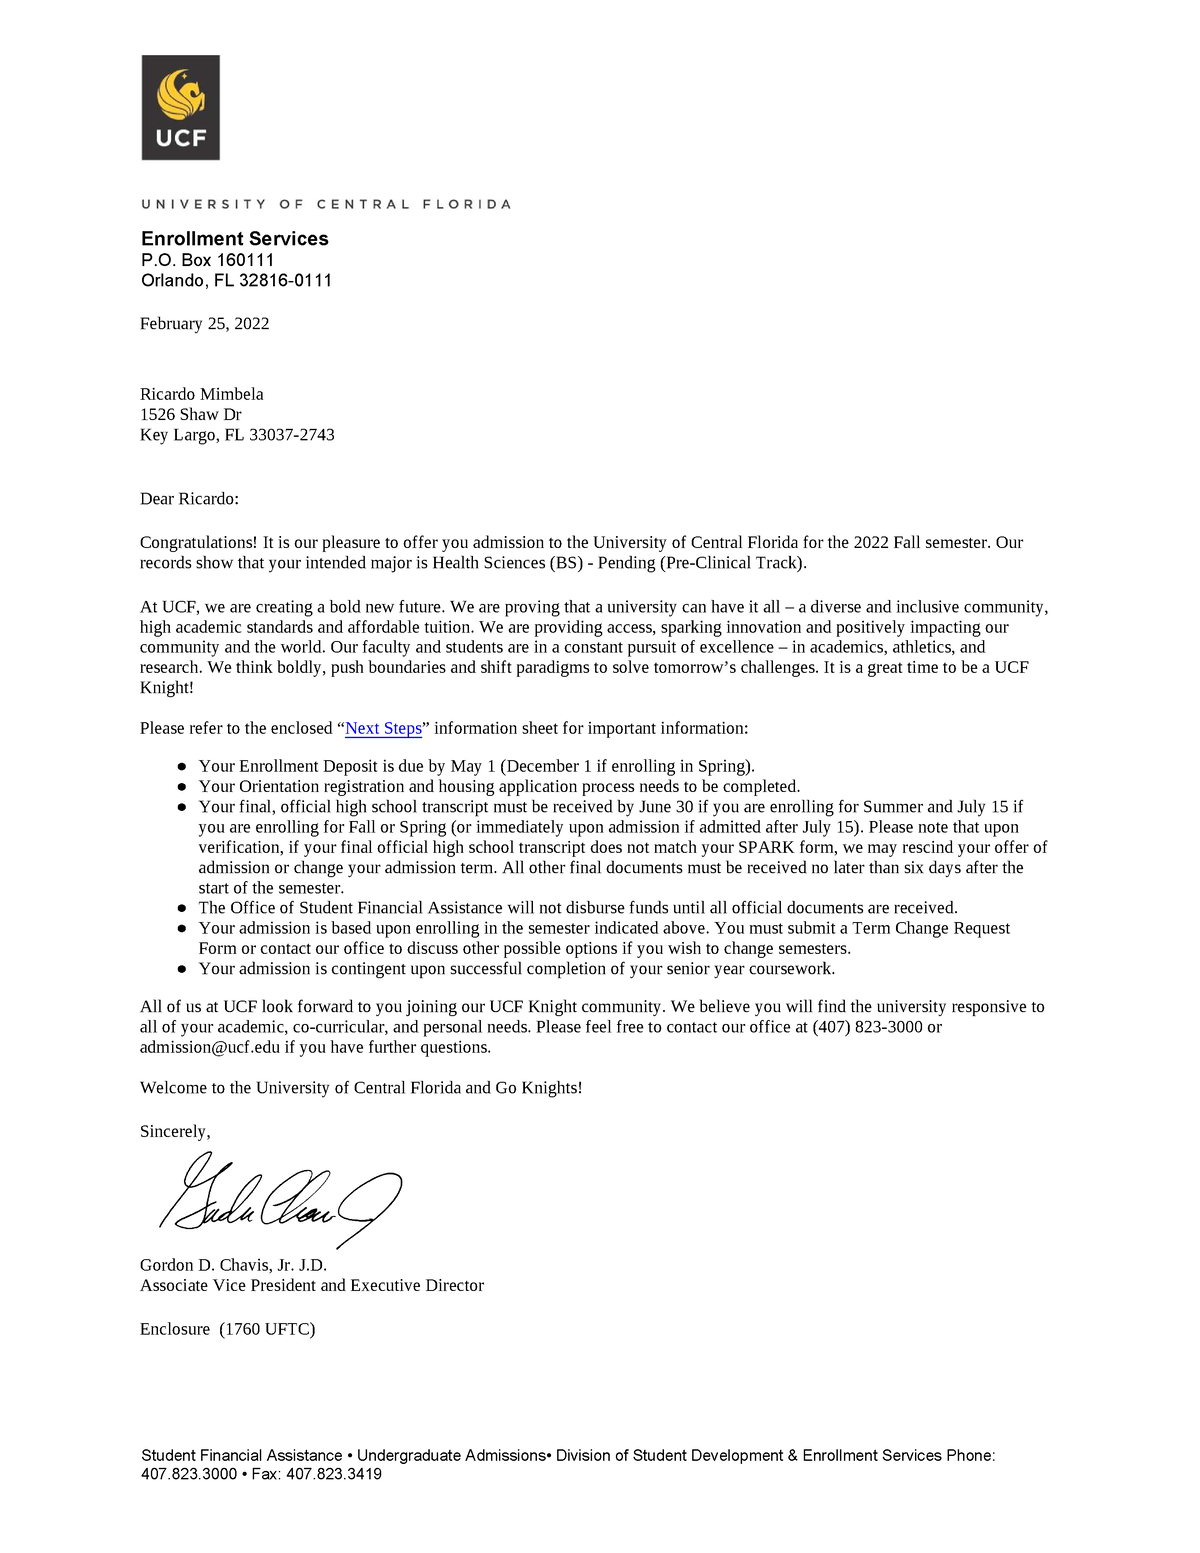 UCF acceptance letter aaaaa Student Financial Assistance